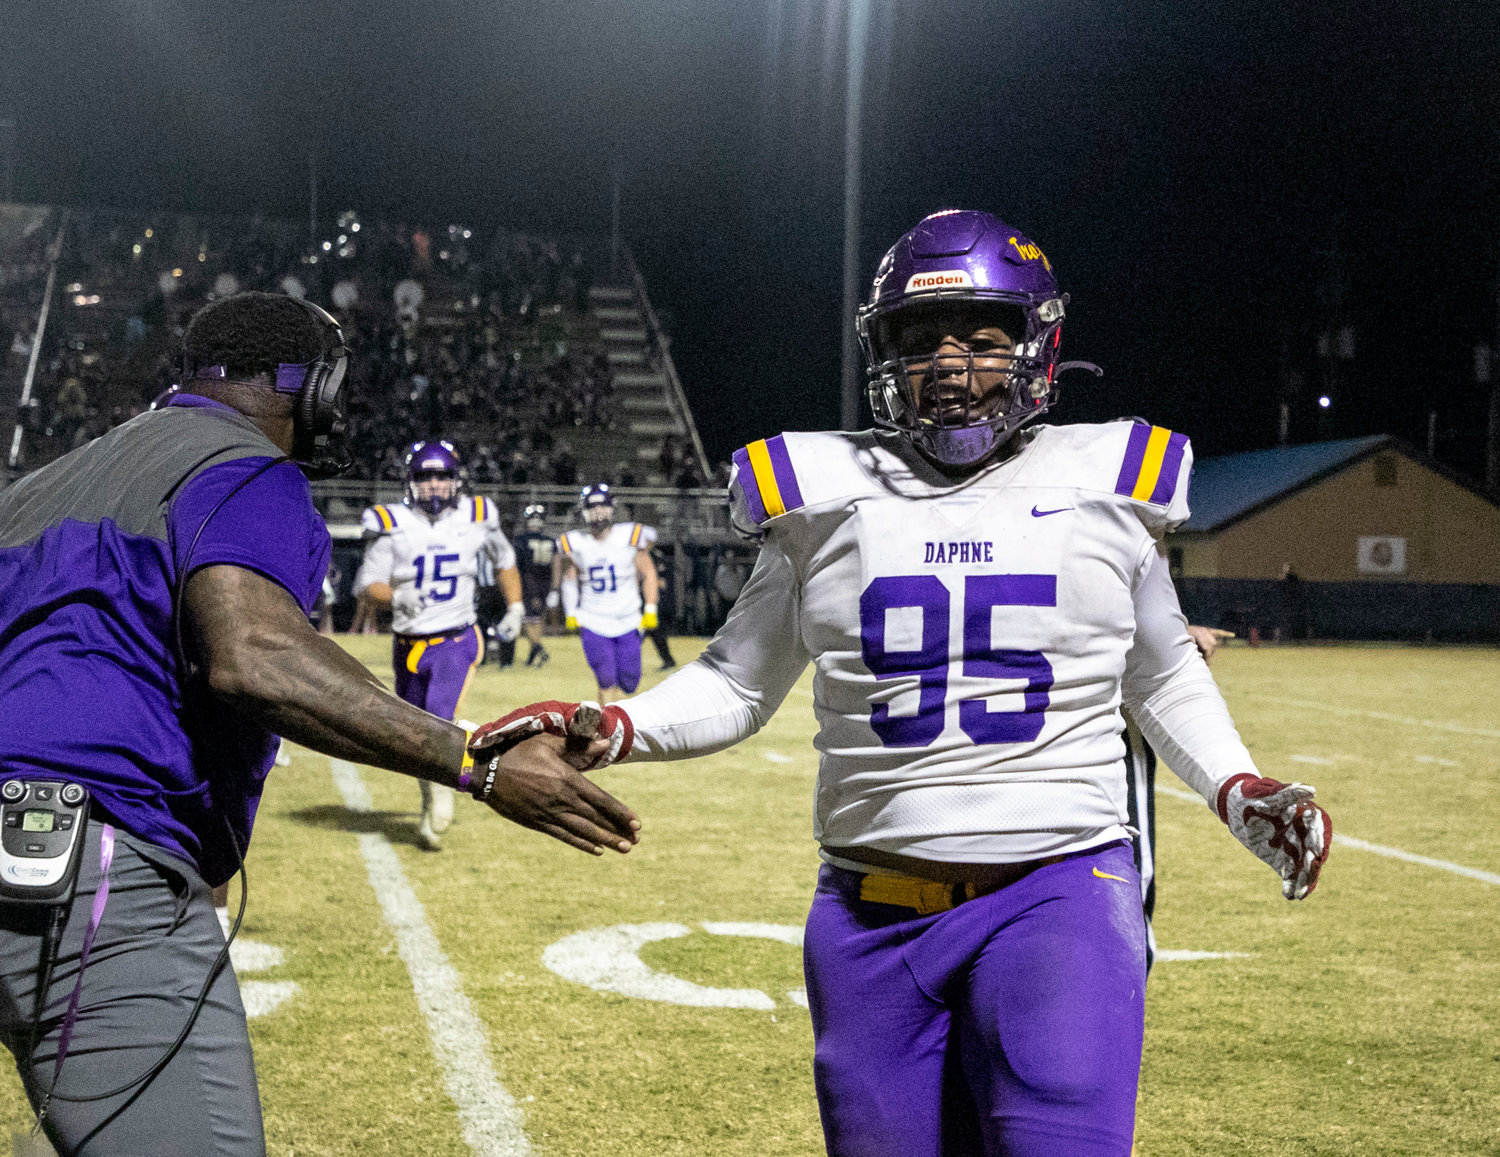 Trojan defensive end Johnnie Perdue celebrates Daphne’s recovery of a fumble in the third quarter of the Class 7A Region 1 title game at Ivan Jones Stadium in Foley.